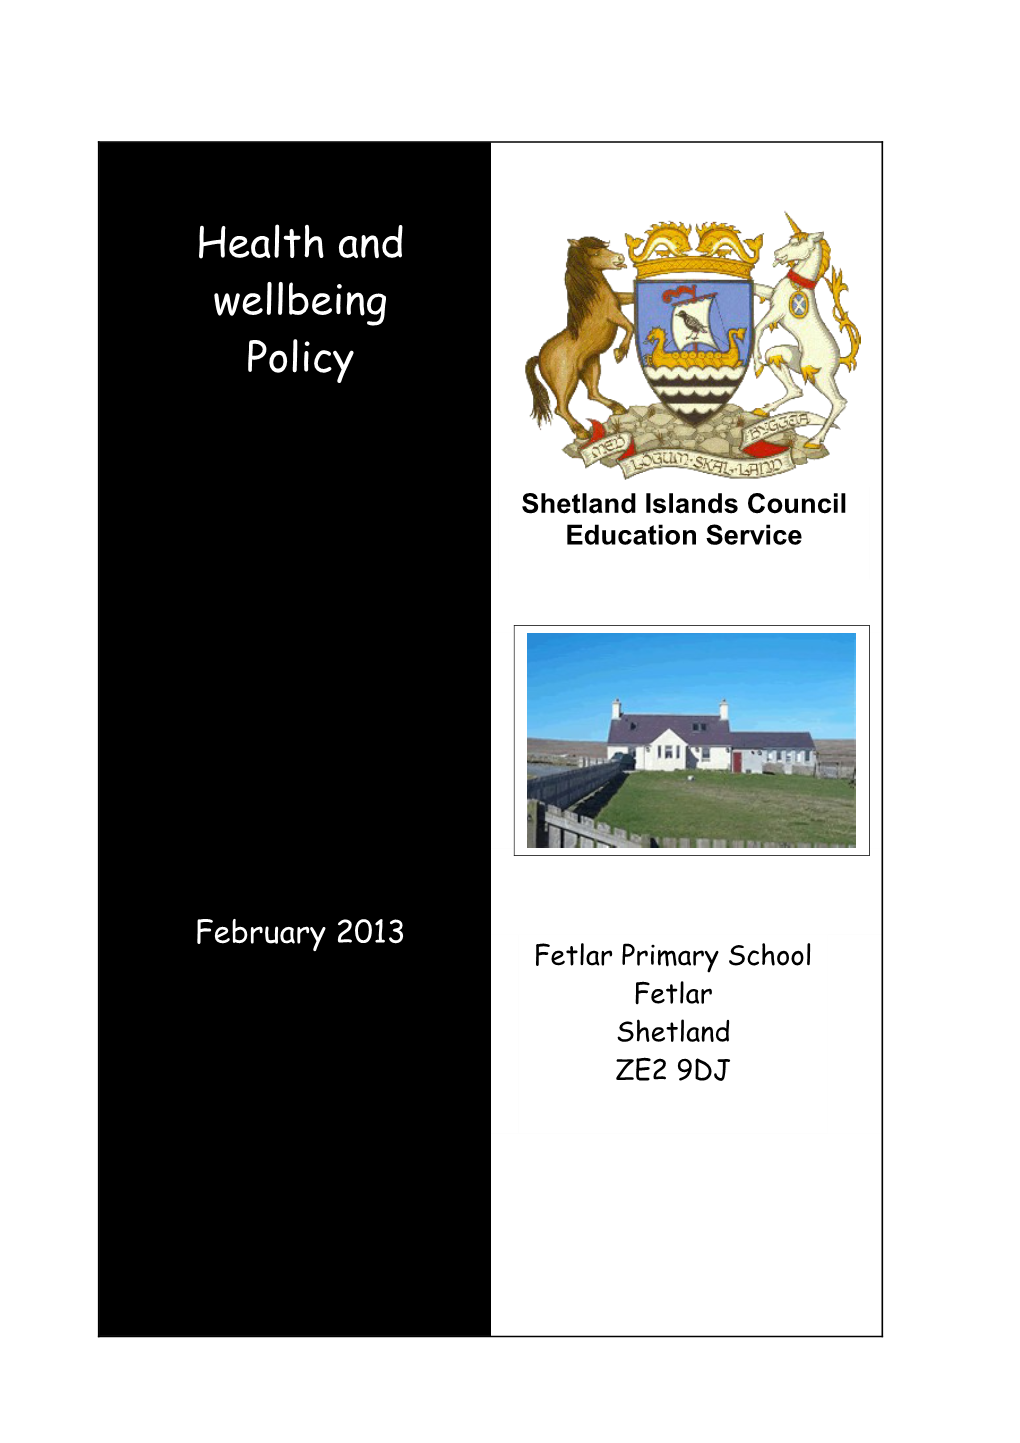 Fetlar Primary School Health and Wellbeing Policy